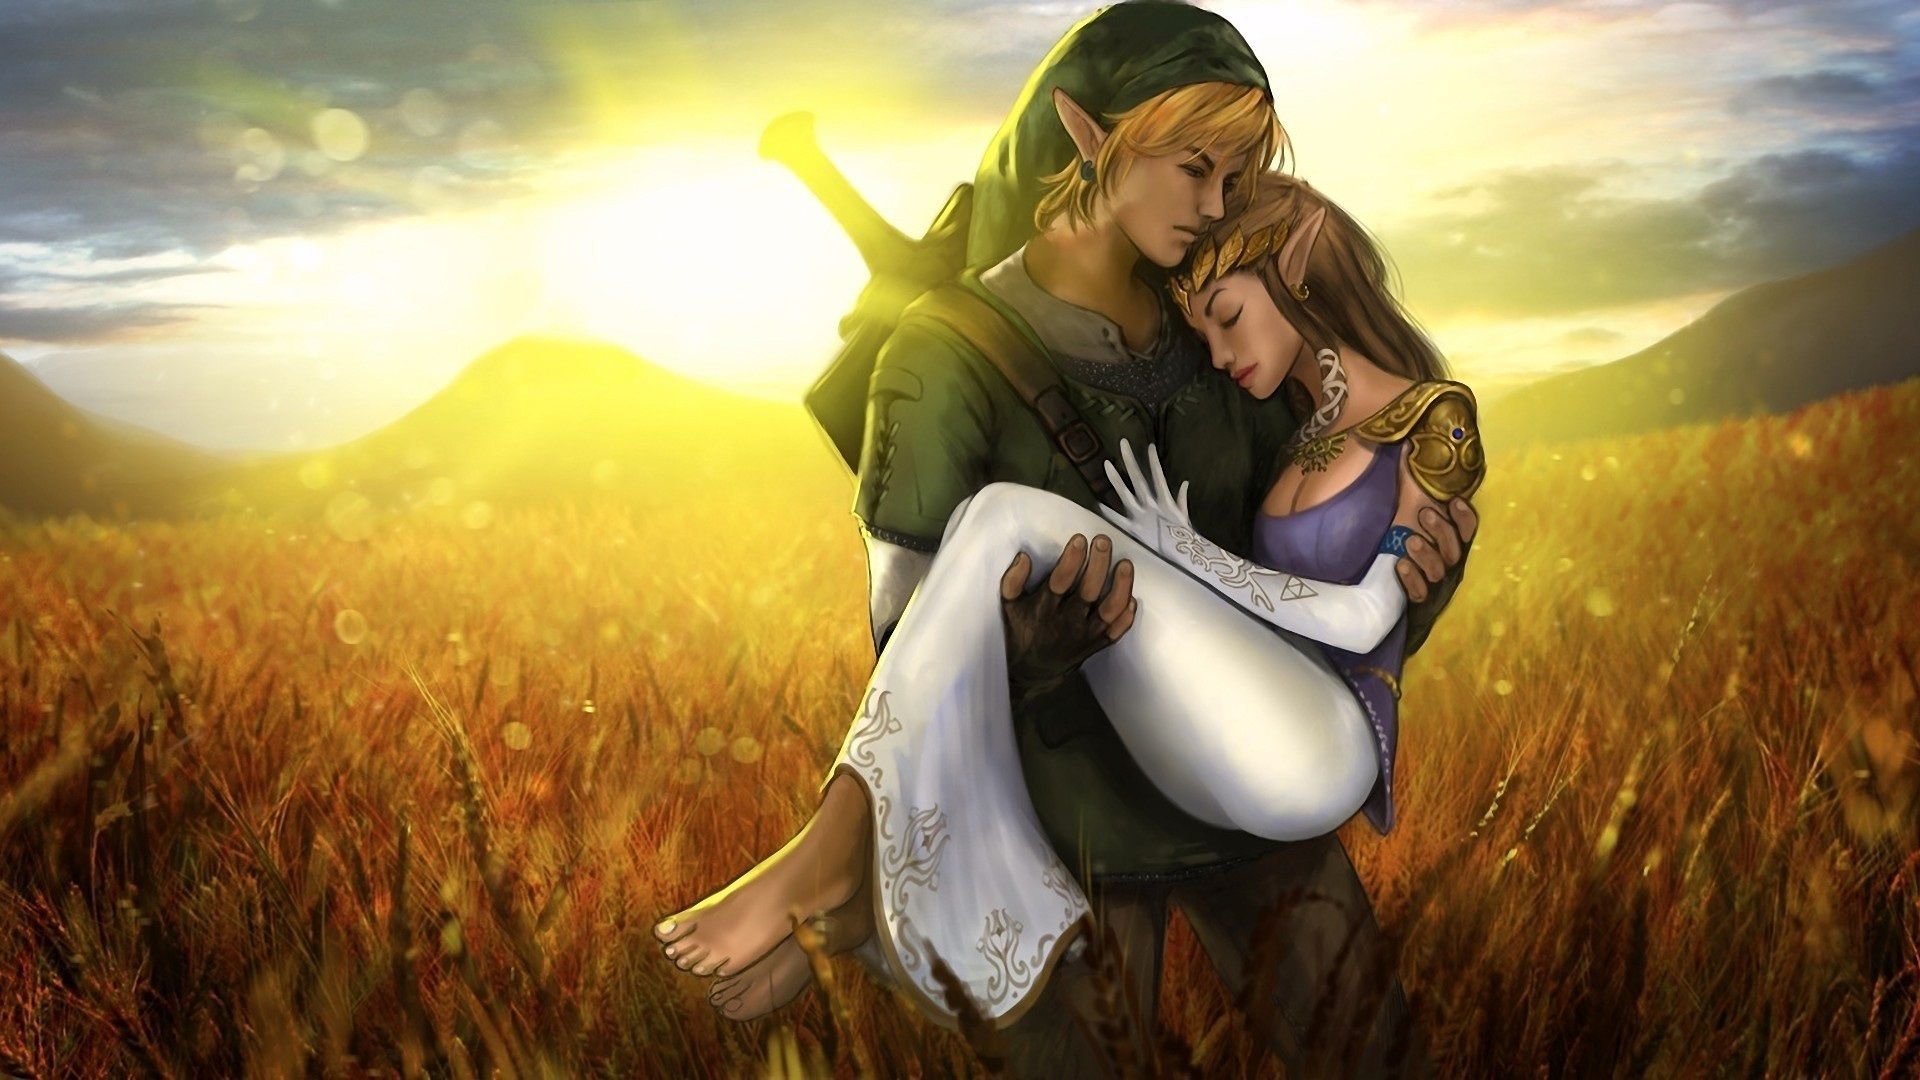 Wallpaper The Legend of Zelda, boy with girl love 1920x1080 Full HD 2K Picture, Image